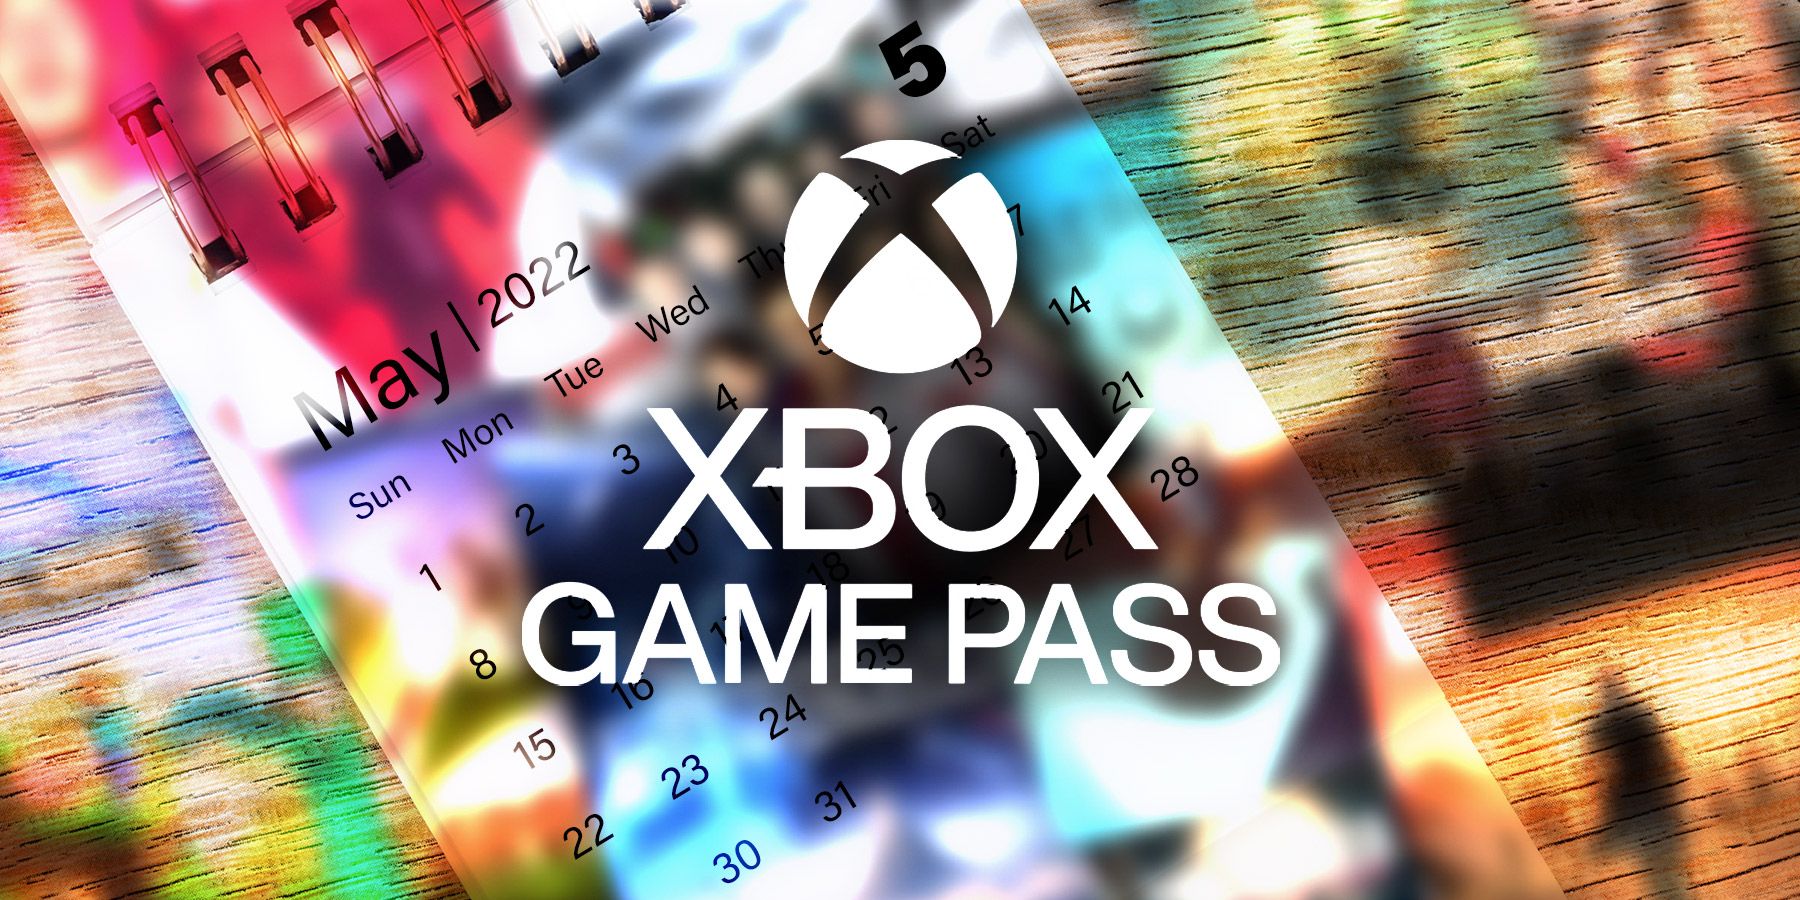 Microsoft Xbox Game Pass Games For May 2022 Announced: All New Games Coming  This Month - News18